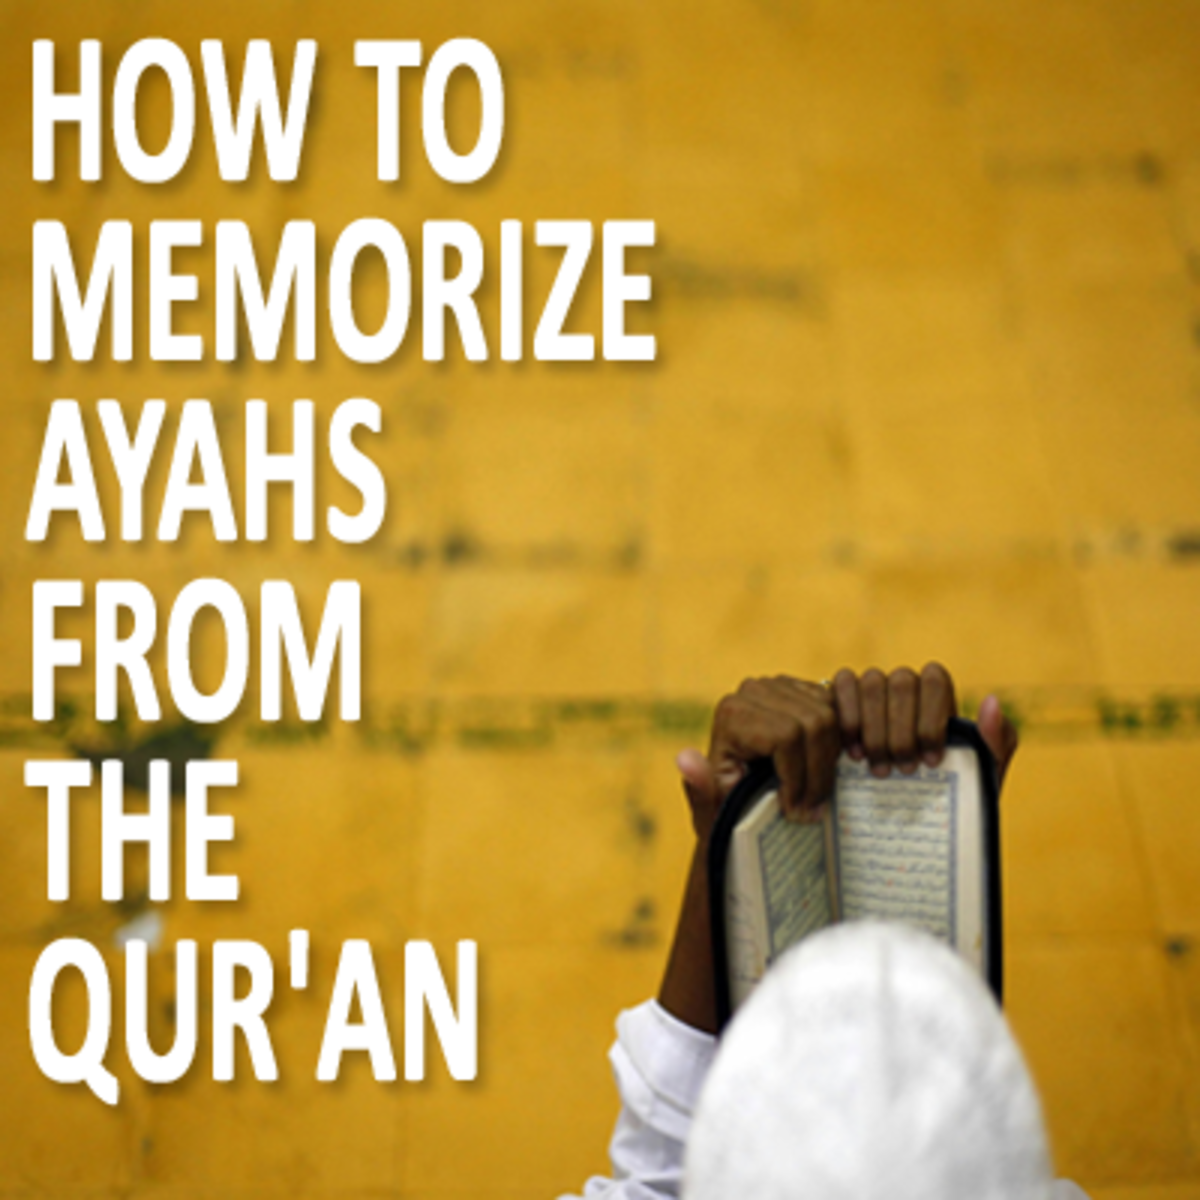 How to Memorize Ayahs From the Qur'an